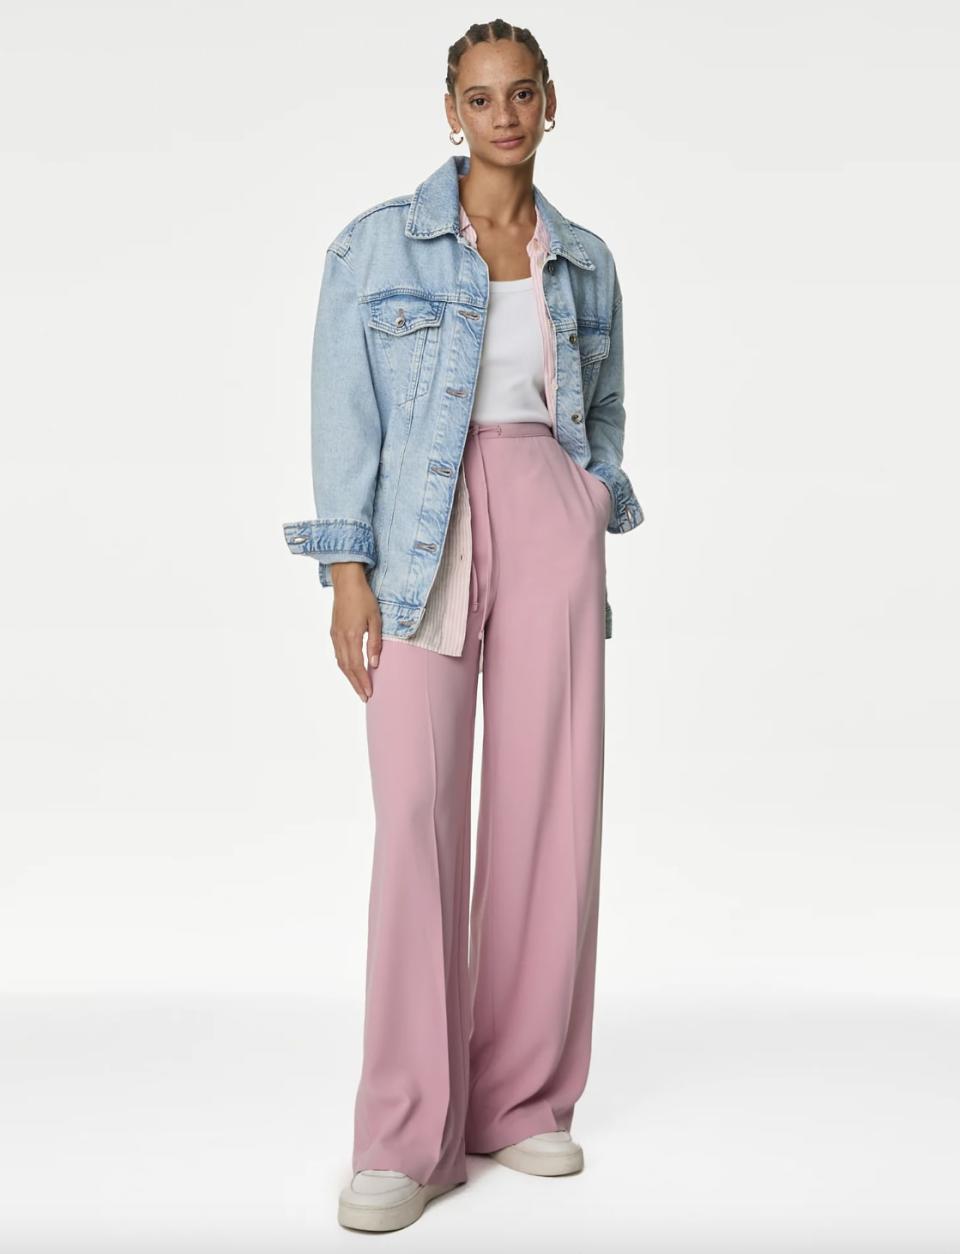 These affordable trousers come in four different shades, this powder pink hue is one of our favourites. (Marks & Spencer)